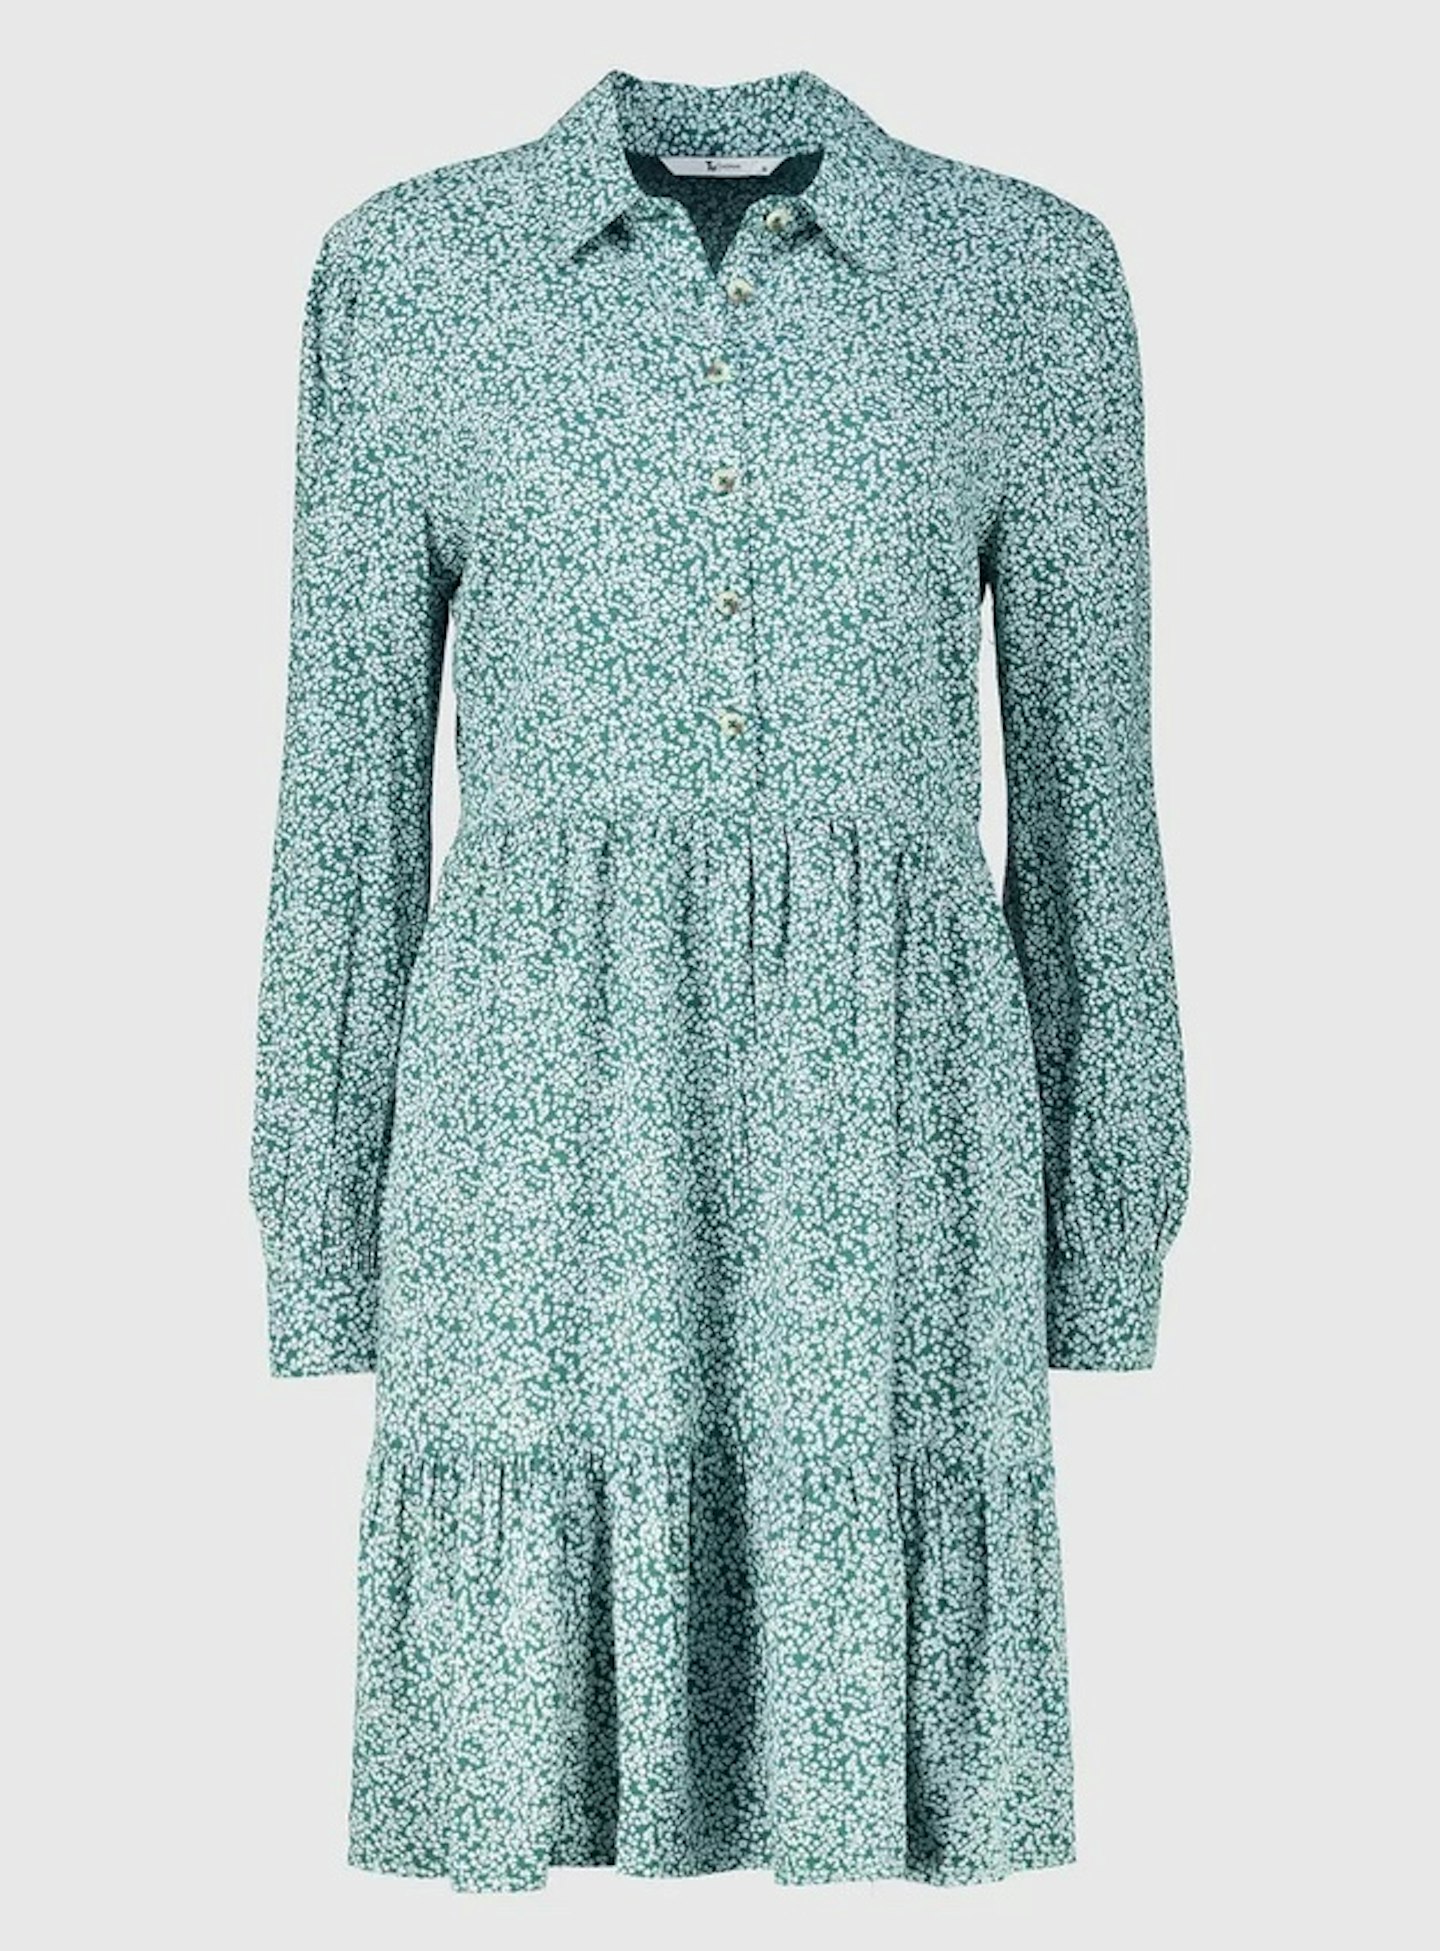 Green Ditsy Floral Tiered Shirt Dress, 22